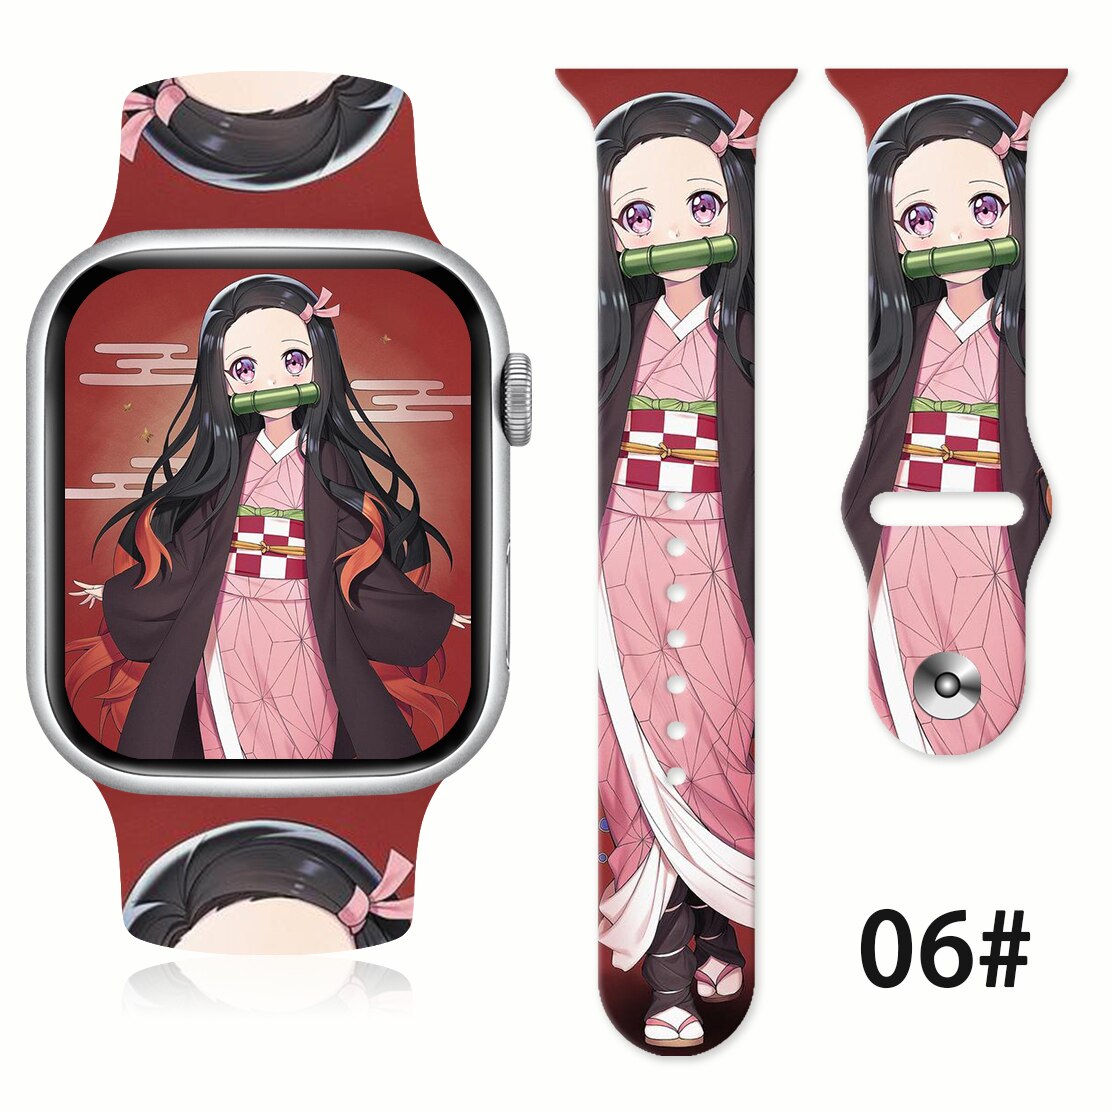 Demon Slayer Strap Band for Apple Watch 06